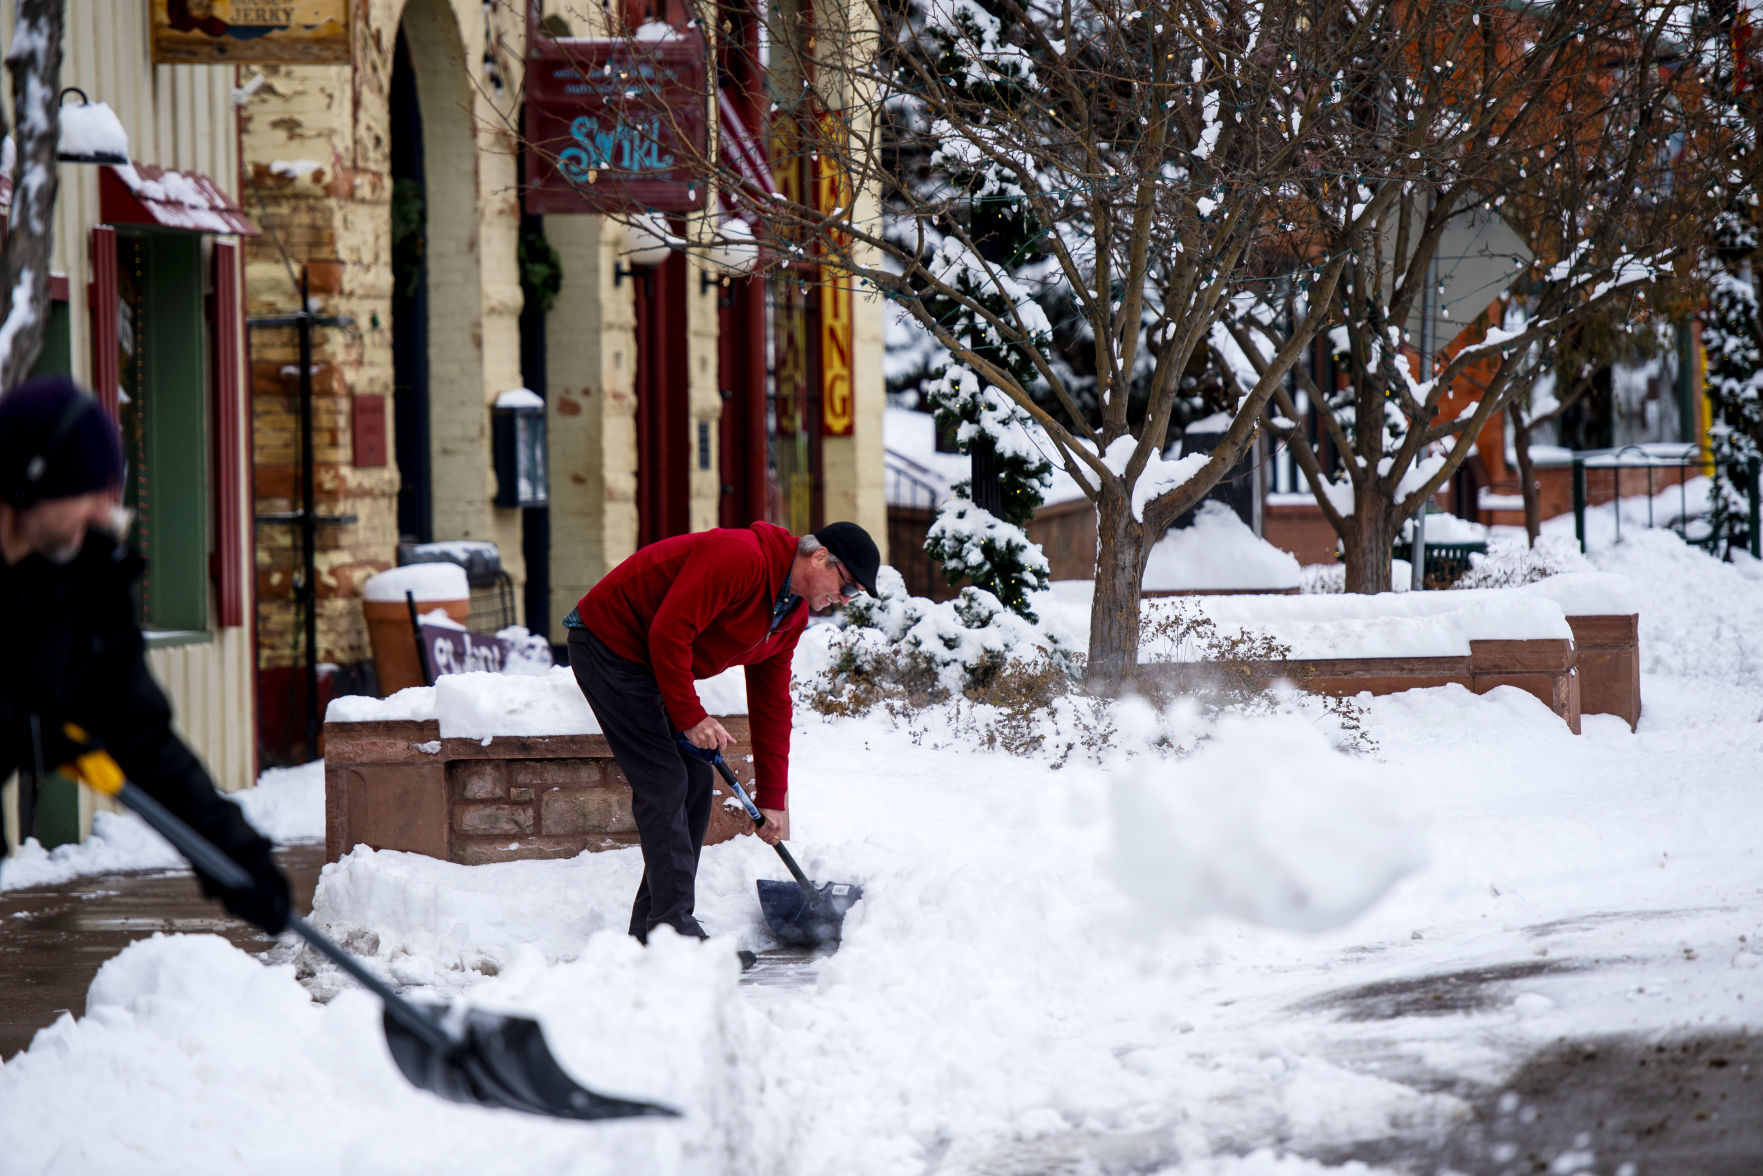 Warming temperatures to give respite for ice-bound Colorado